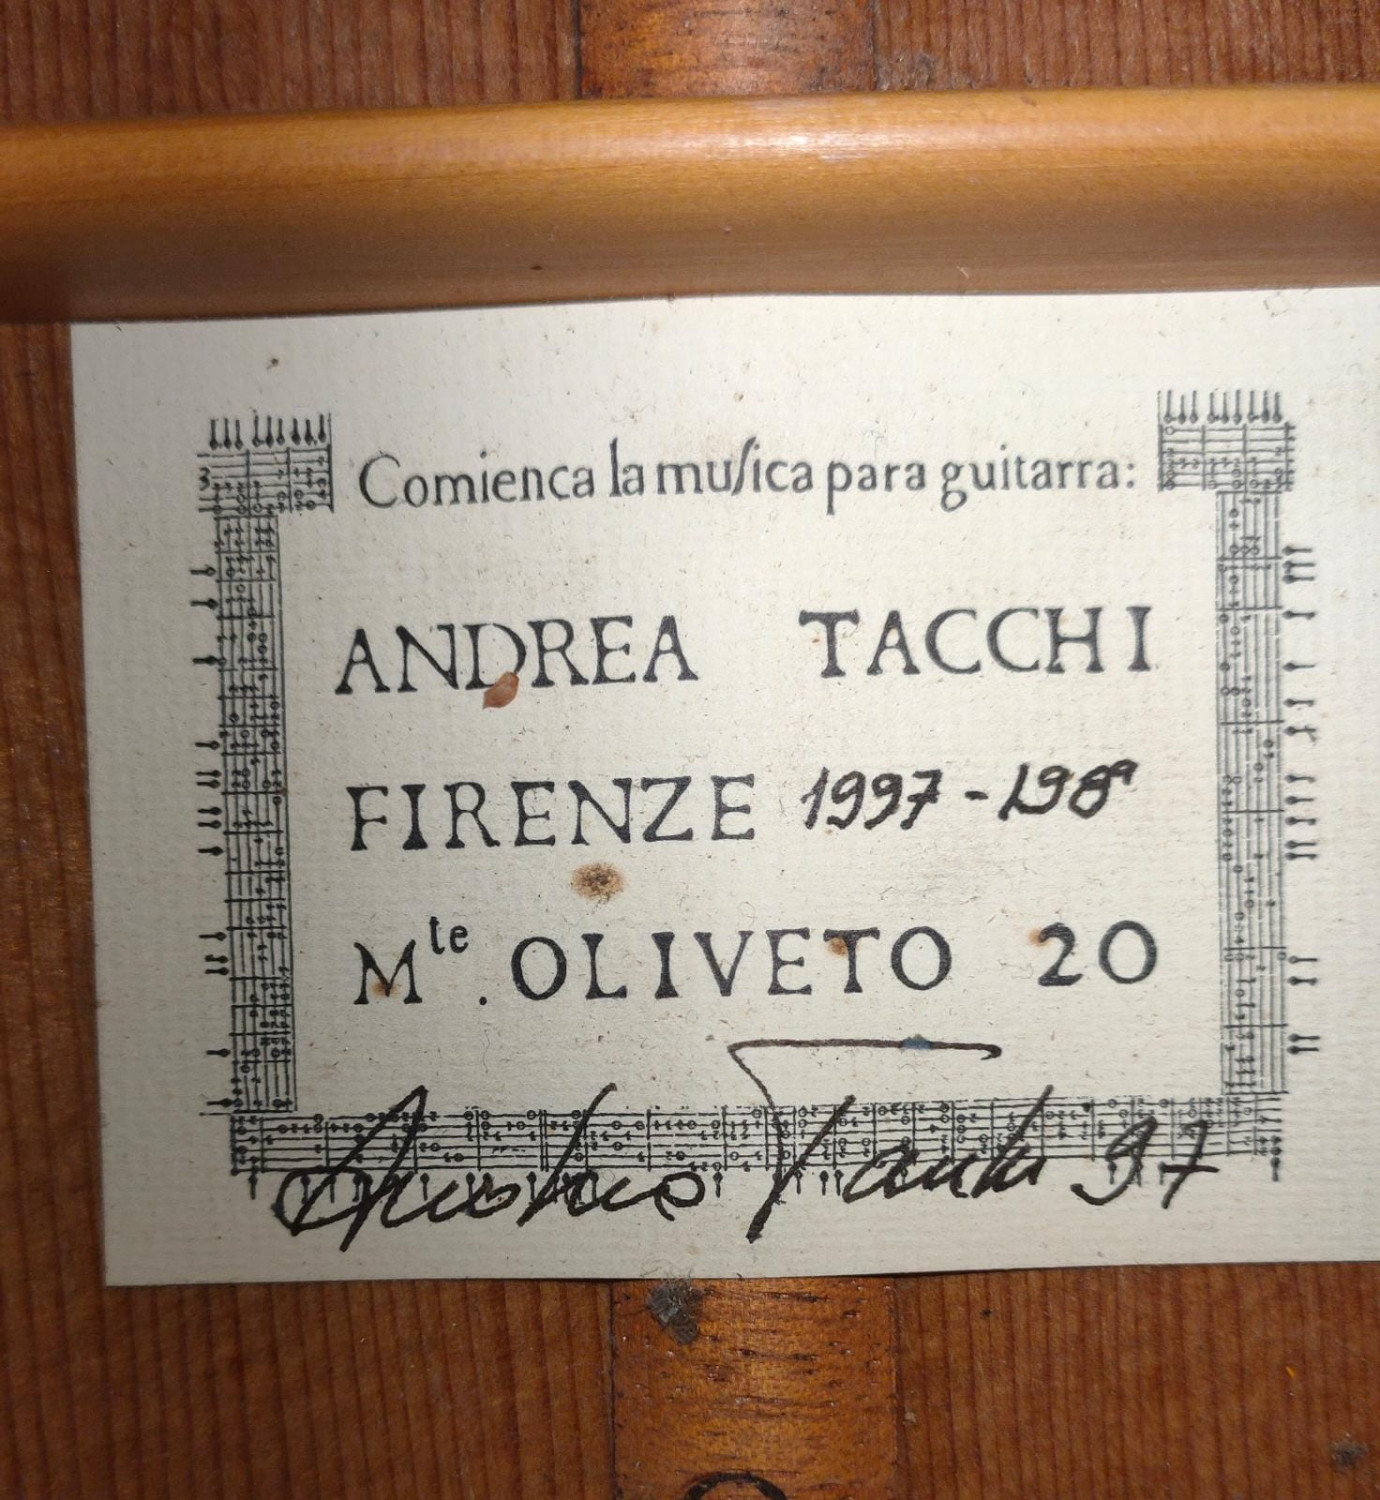 Andrea Tacchi has a 15 year waiting list.